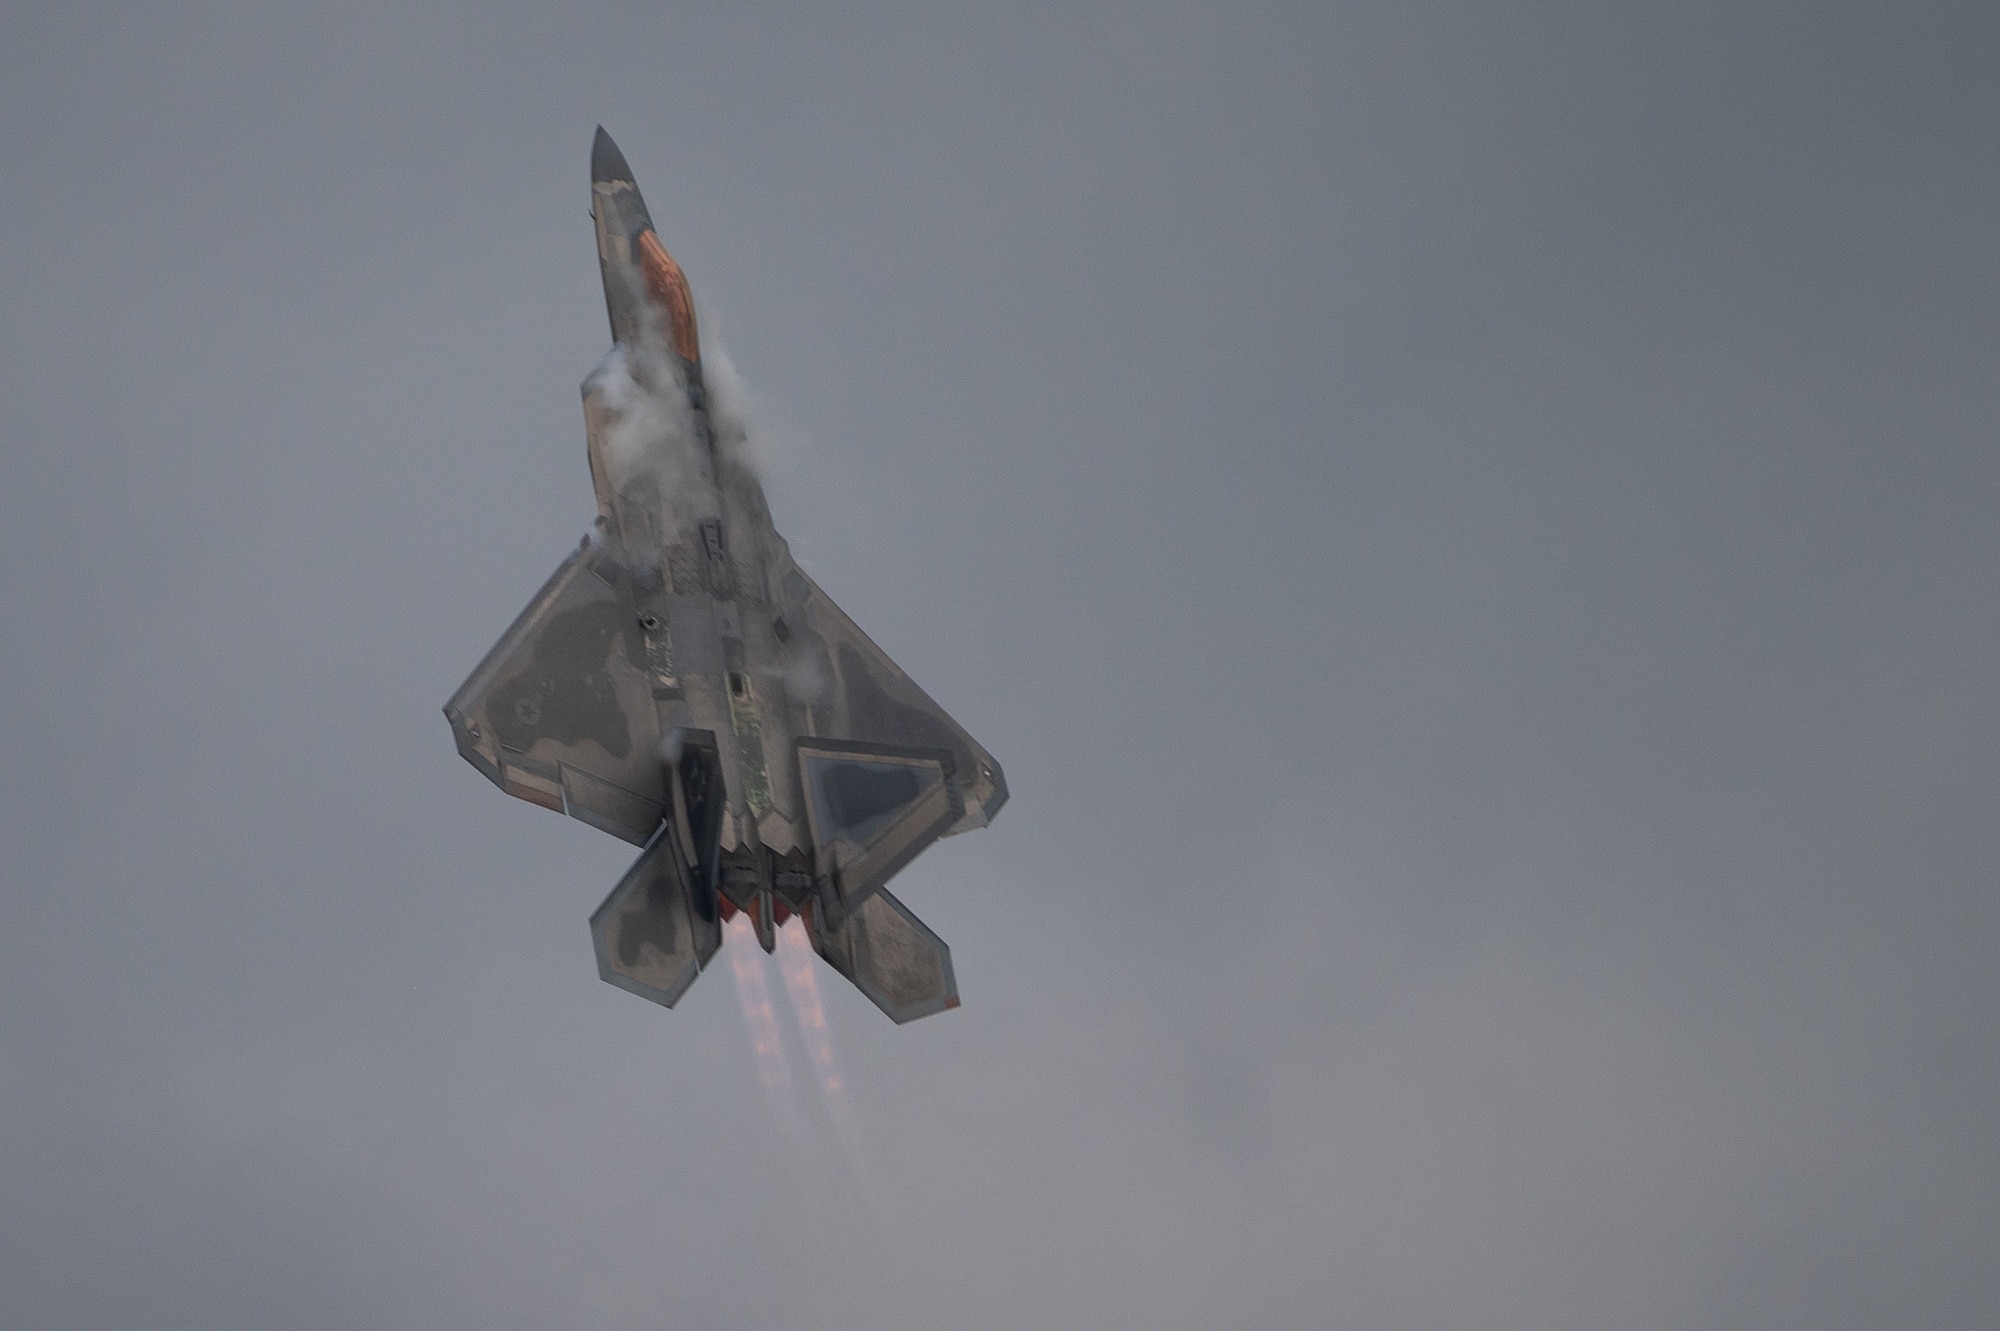 A U.S. Air Force F-22A Raptor flies through clouds during the 2021 Defenders of Liberty Air & Space Show at Barksdale Air Force Base, Louisiana, May 9, 2021. The F-22A, a fifth-generation fighter incorporating fourth-generation stealth aircraft, has the ability to fly at supersonic speed without afterburners. (U.S. Air Force photo by Airman 1st Class Jon)